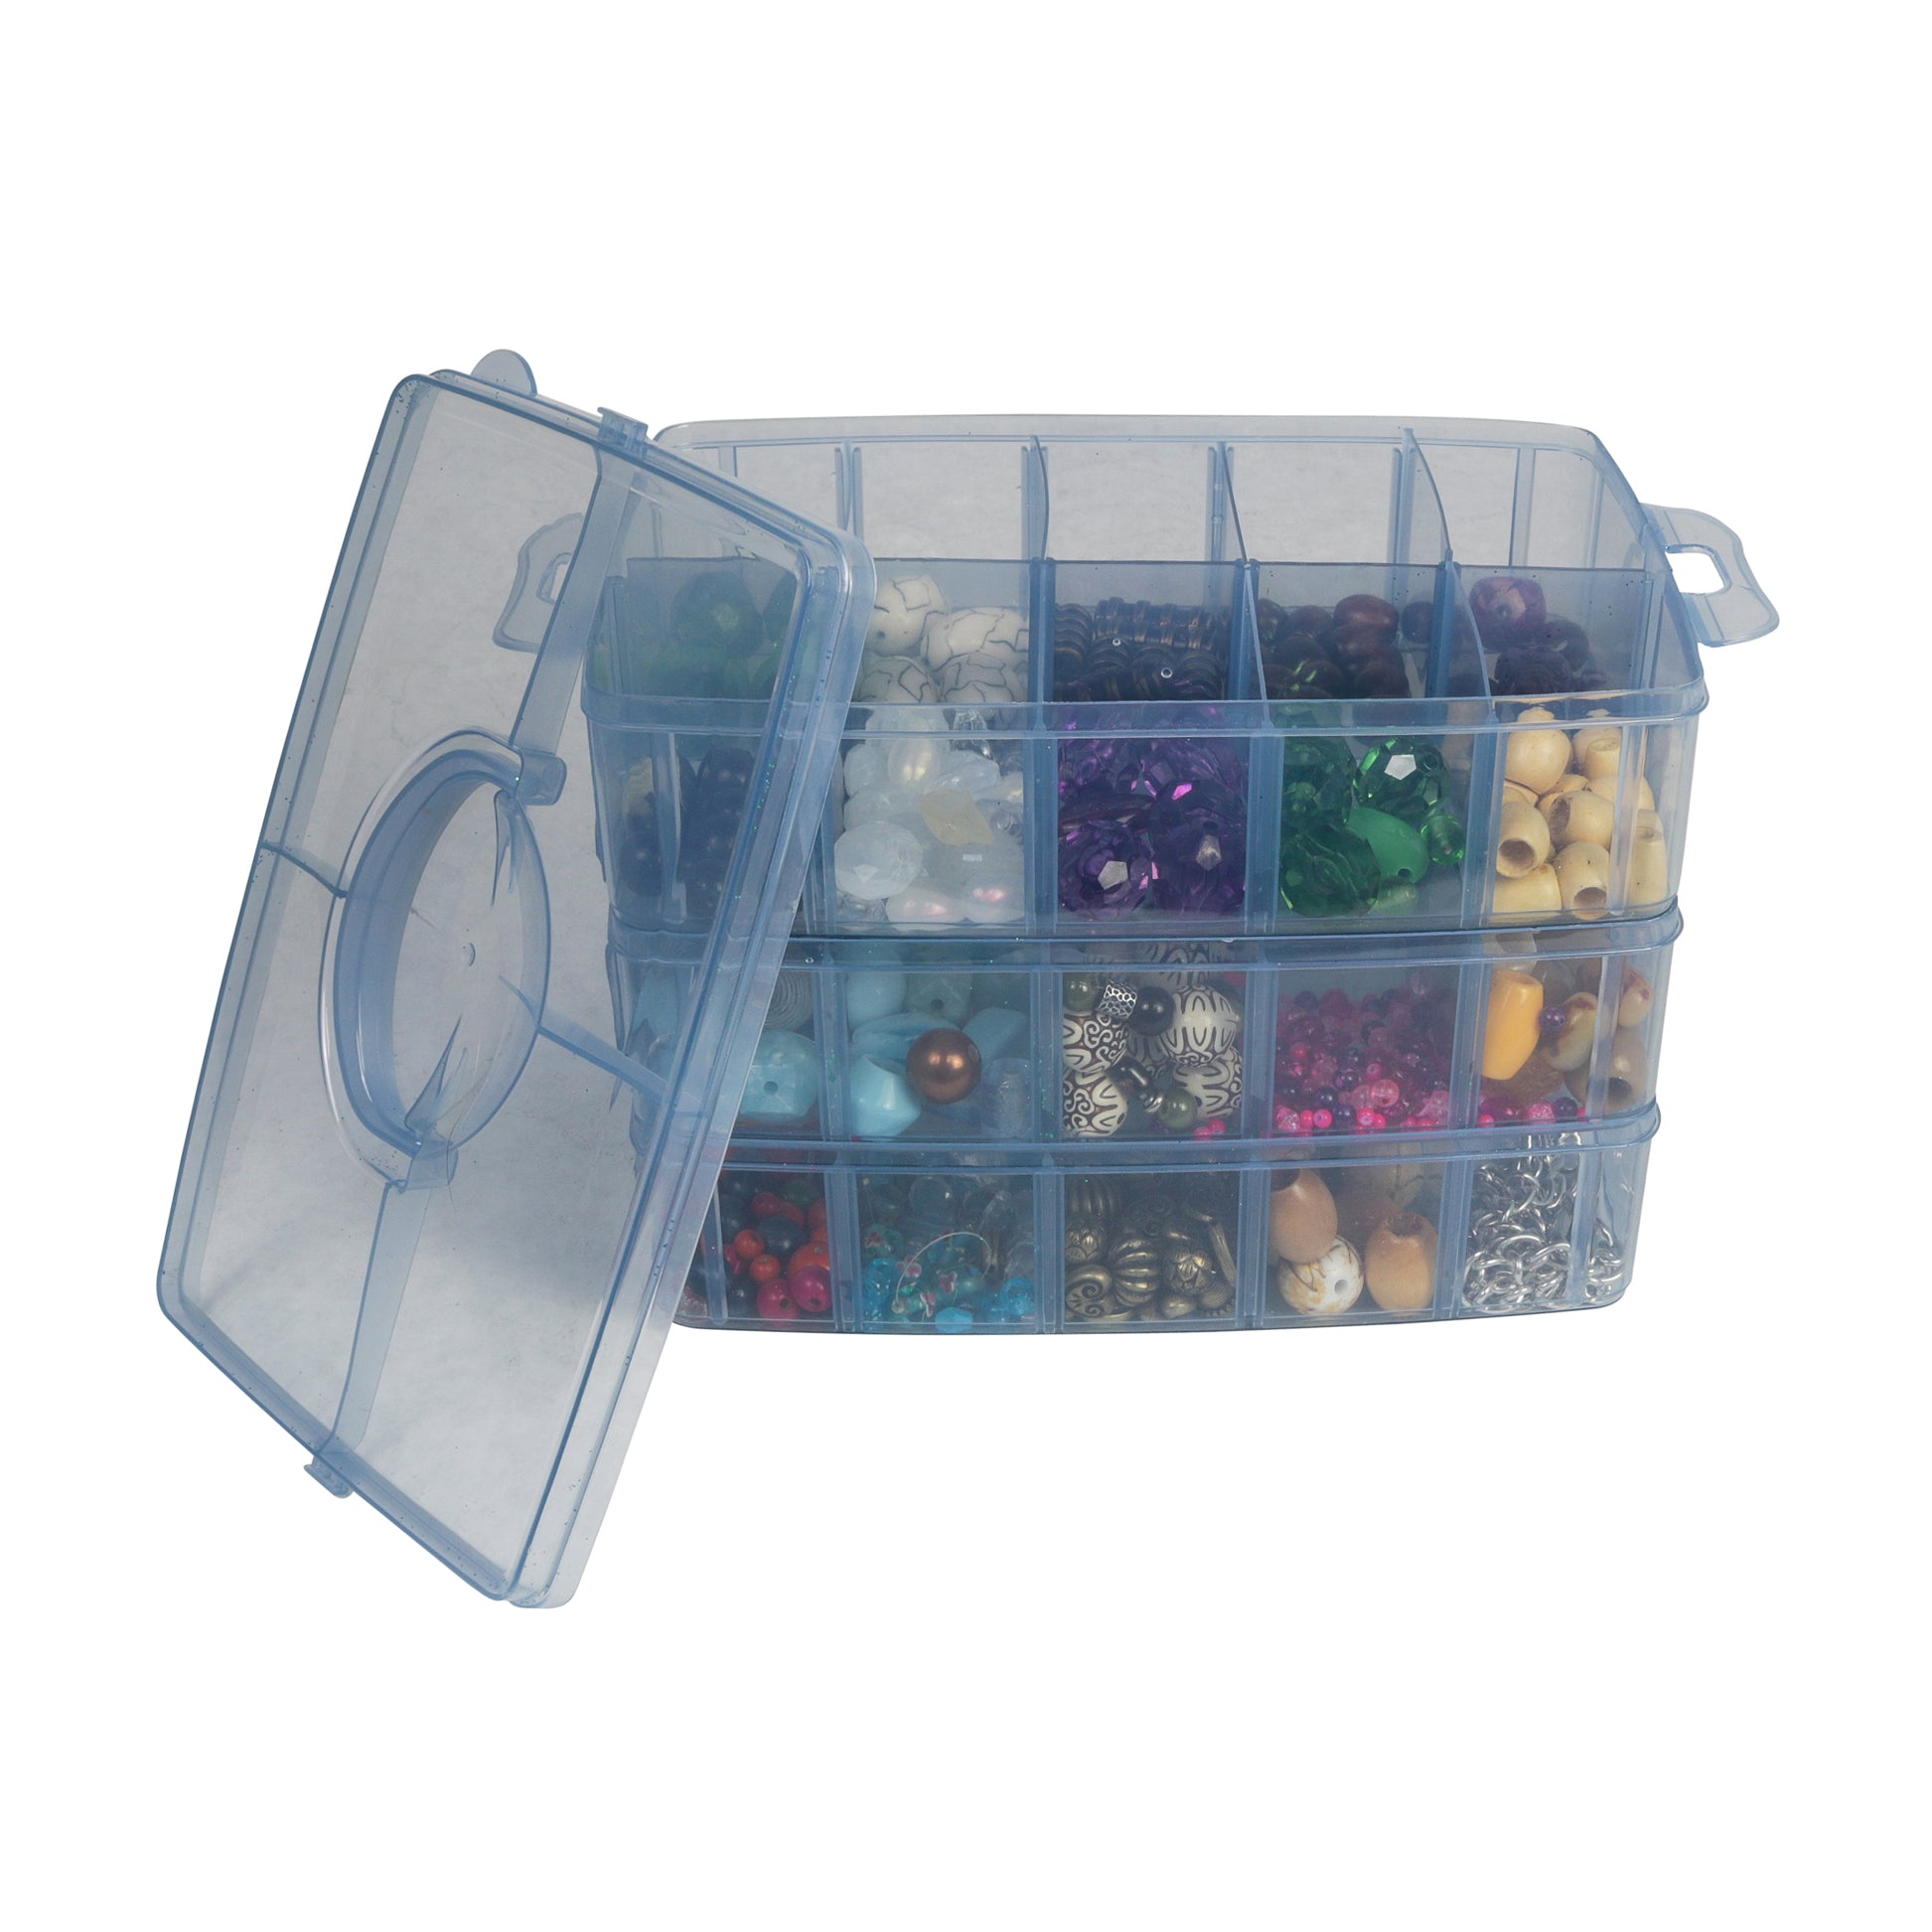 Gray Plastic Storage Containers at